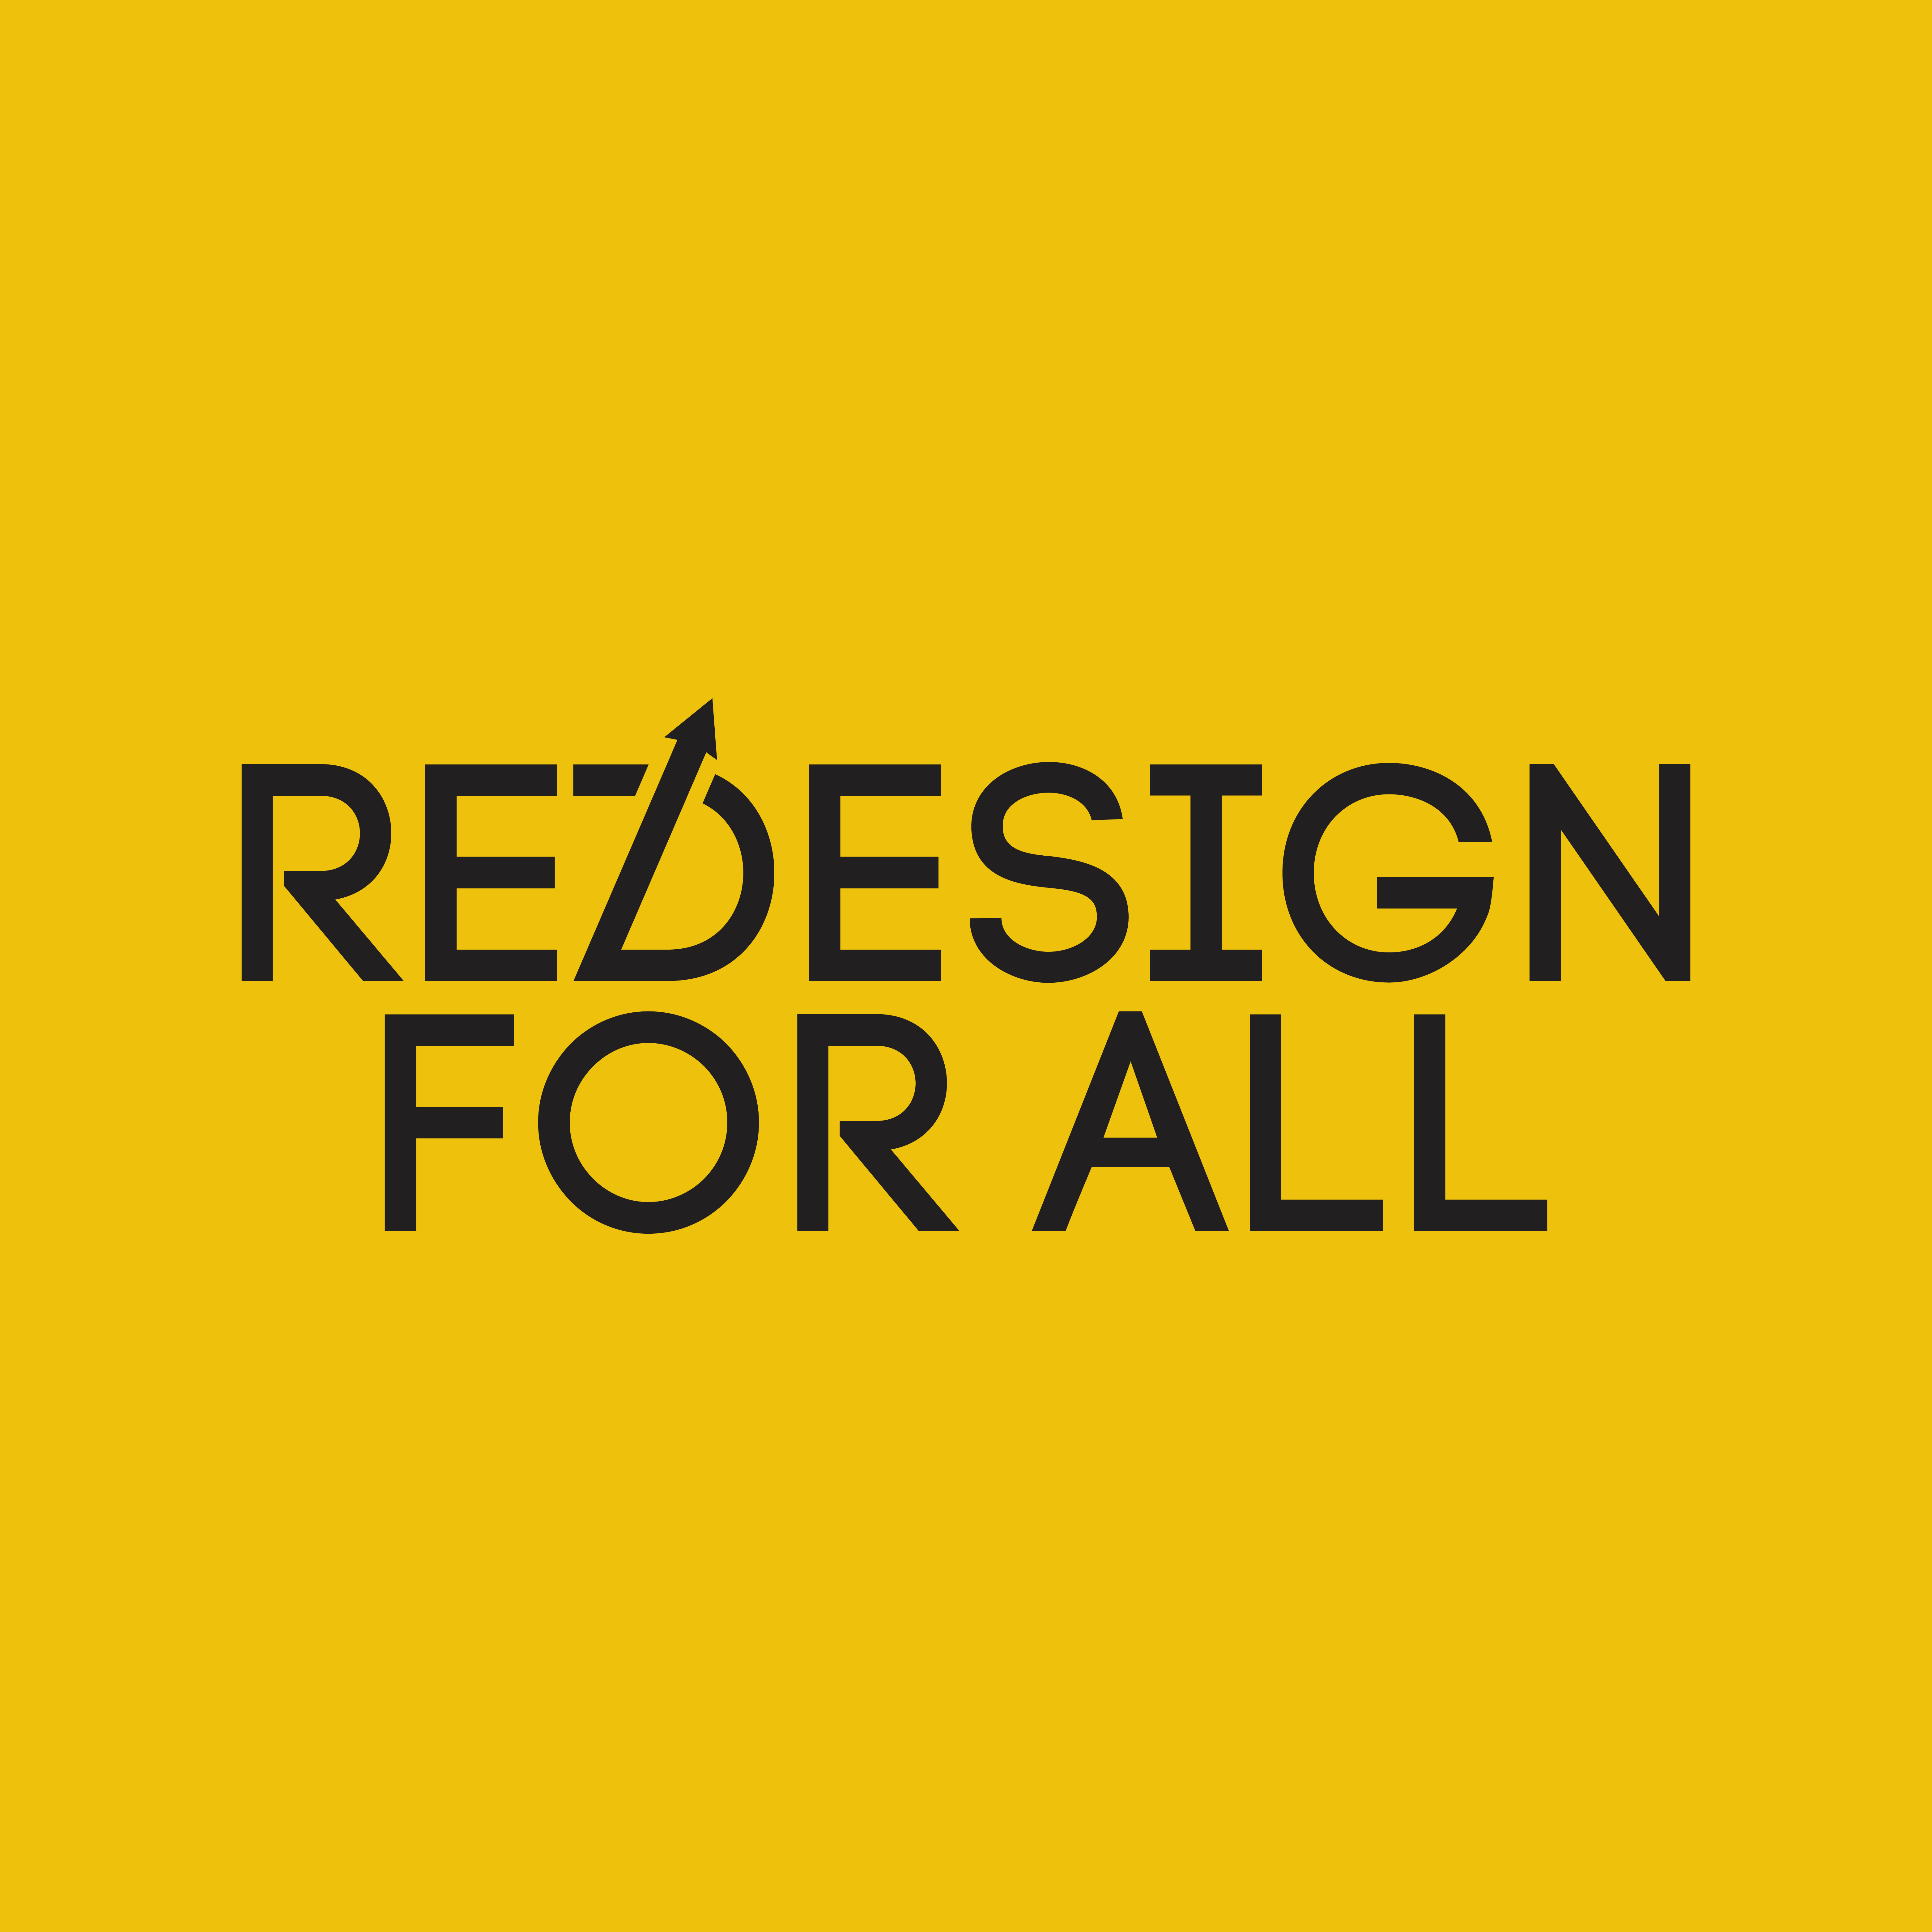 Redesign for All